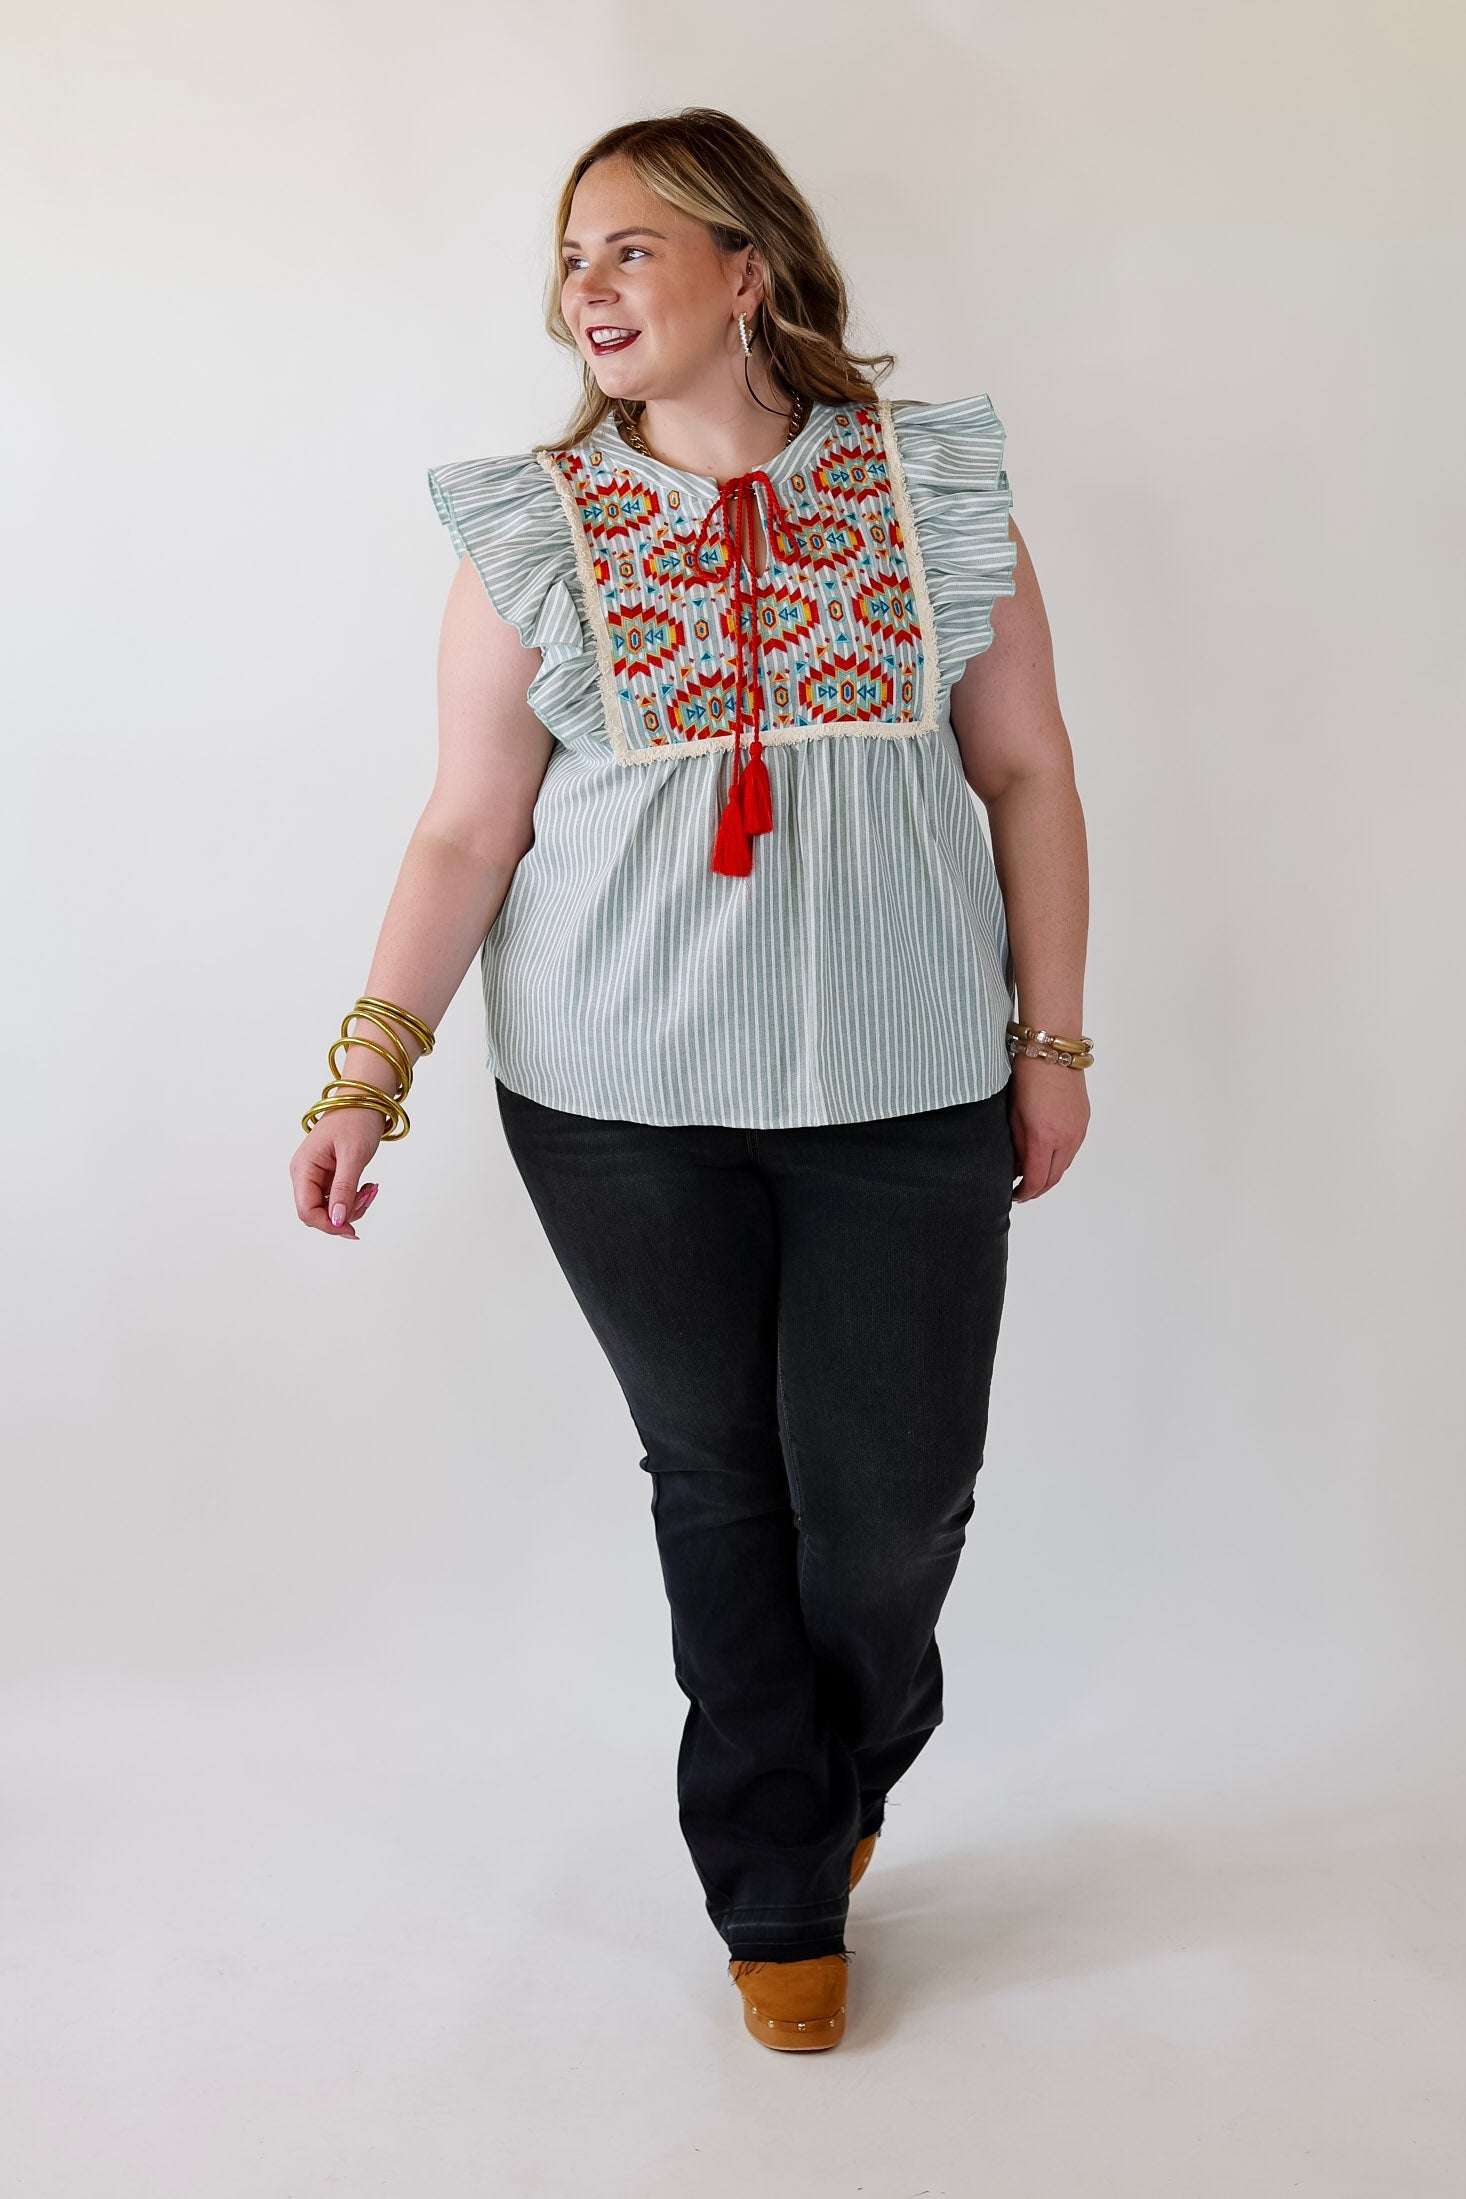 Fall Sun PinStripe Top with Aztec Print Embroidery in Sage Green - Giddy Up Glamour Boutique